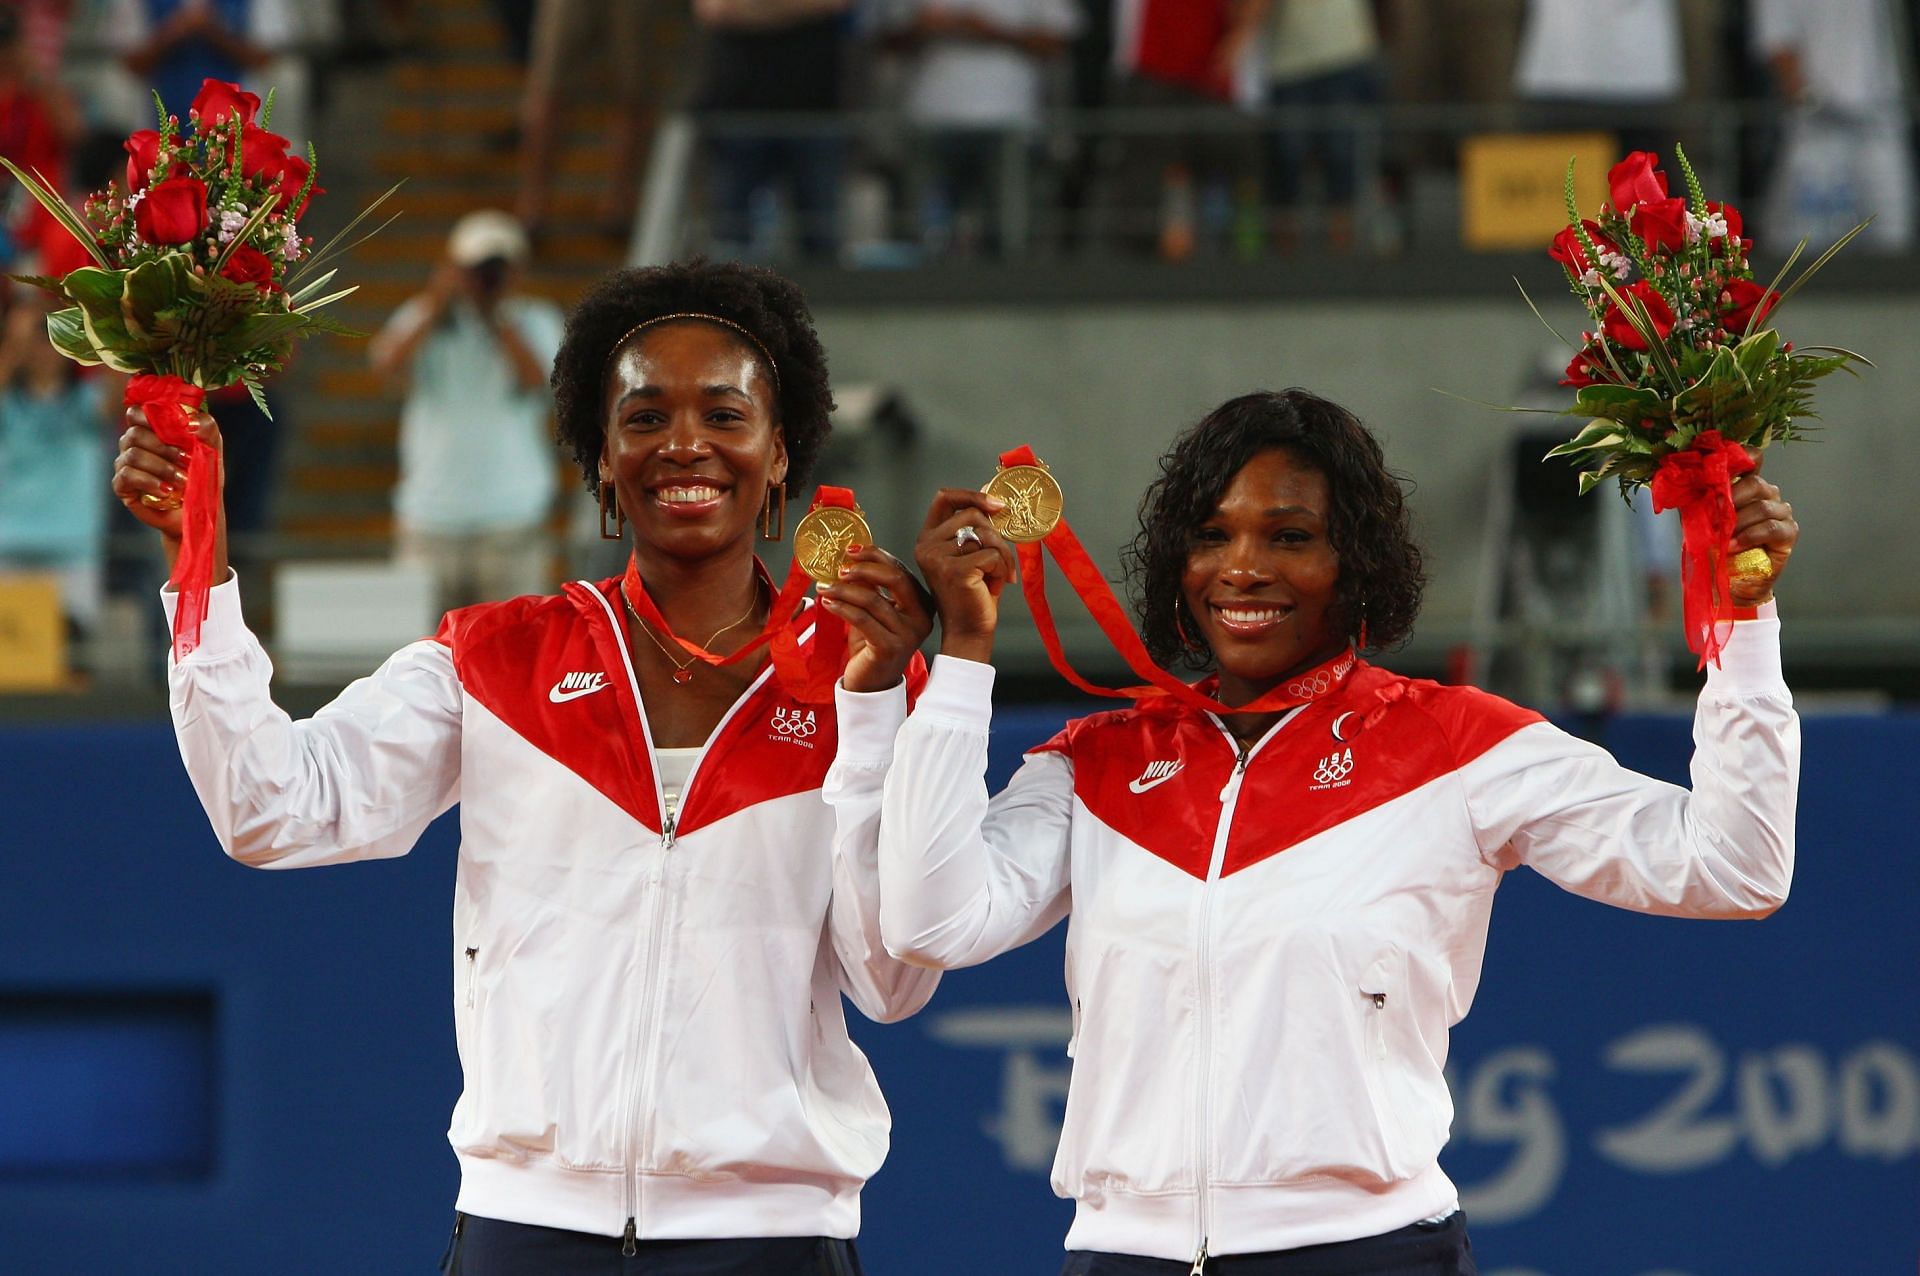 Venus and Serena Williams pose on the podium at the 2008 Beijing Olympics